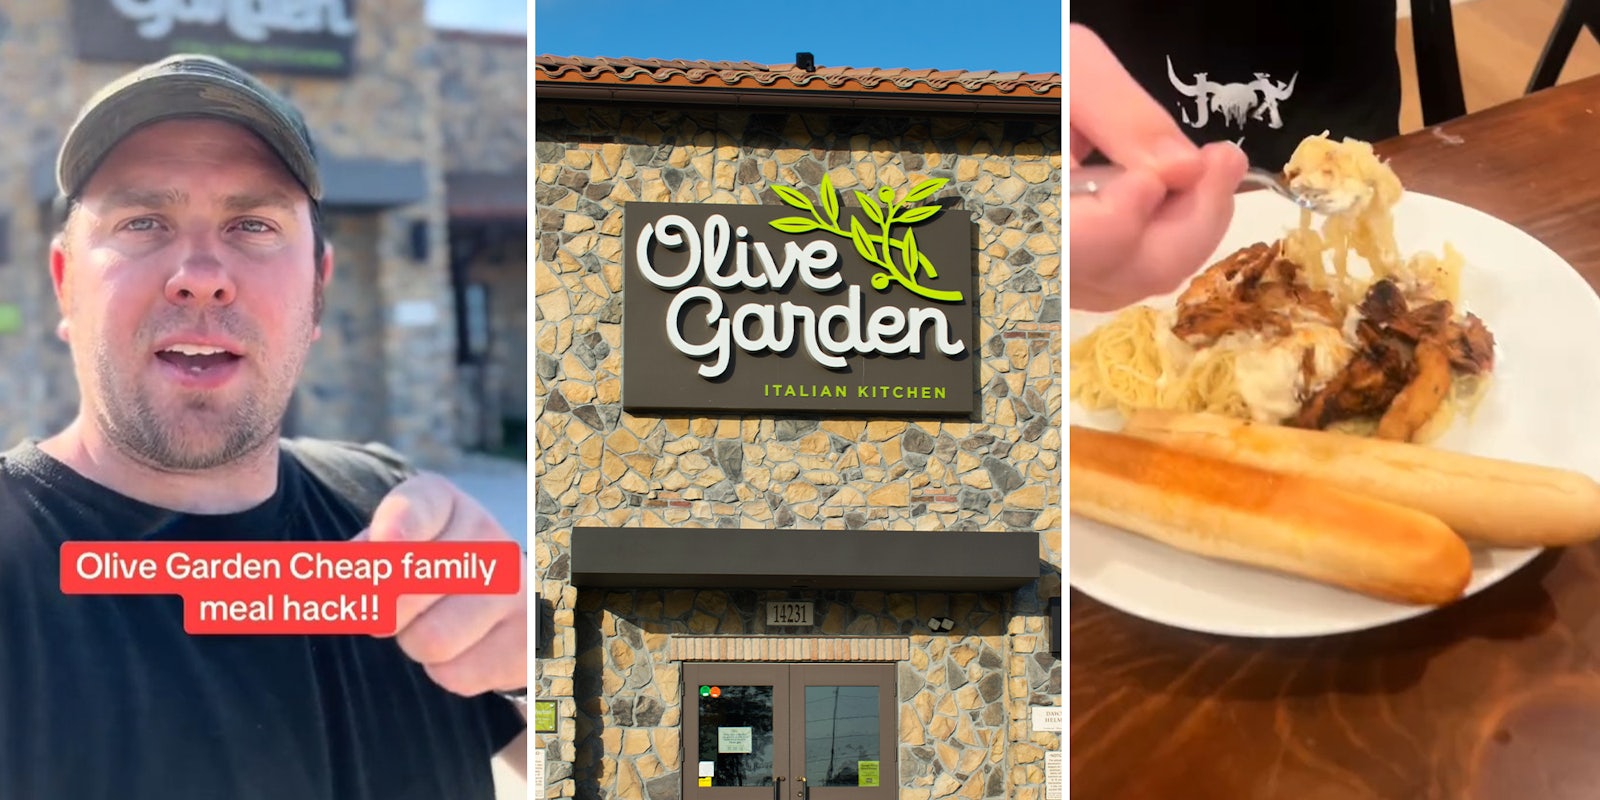 Dad feeds family of 6 with Olive Garden